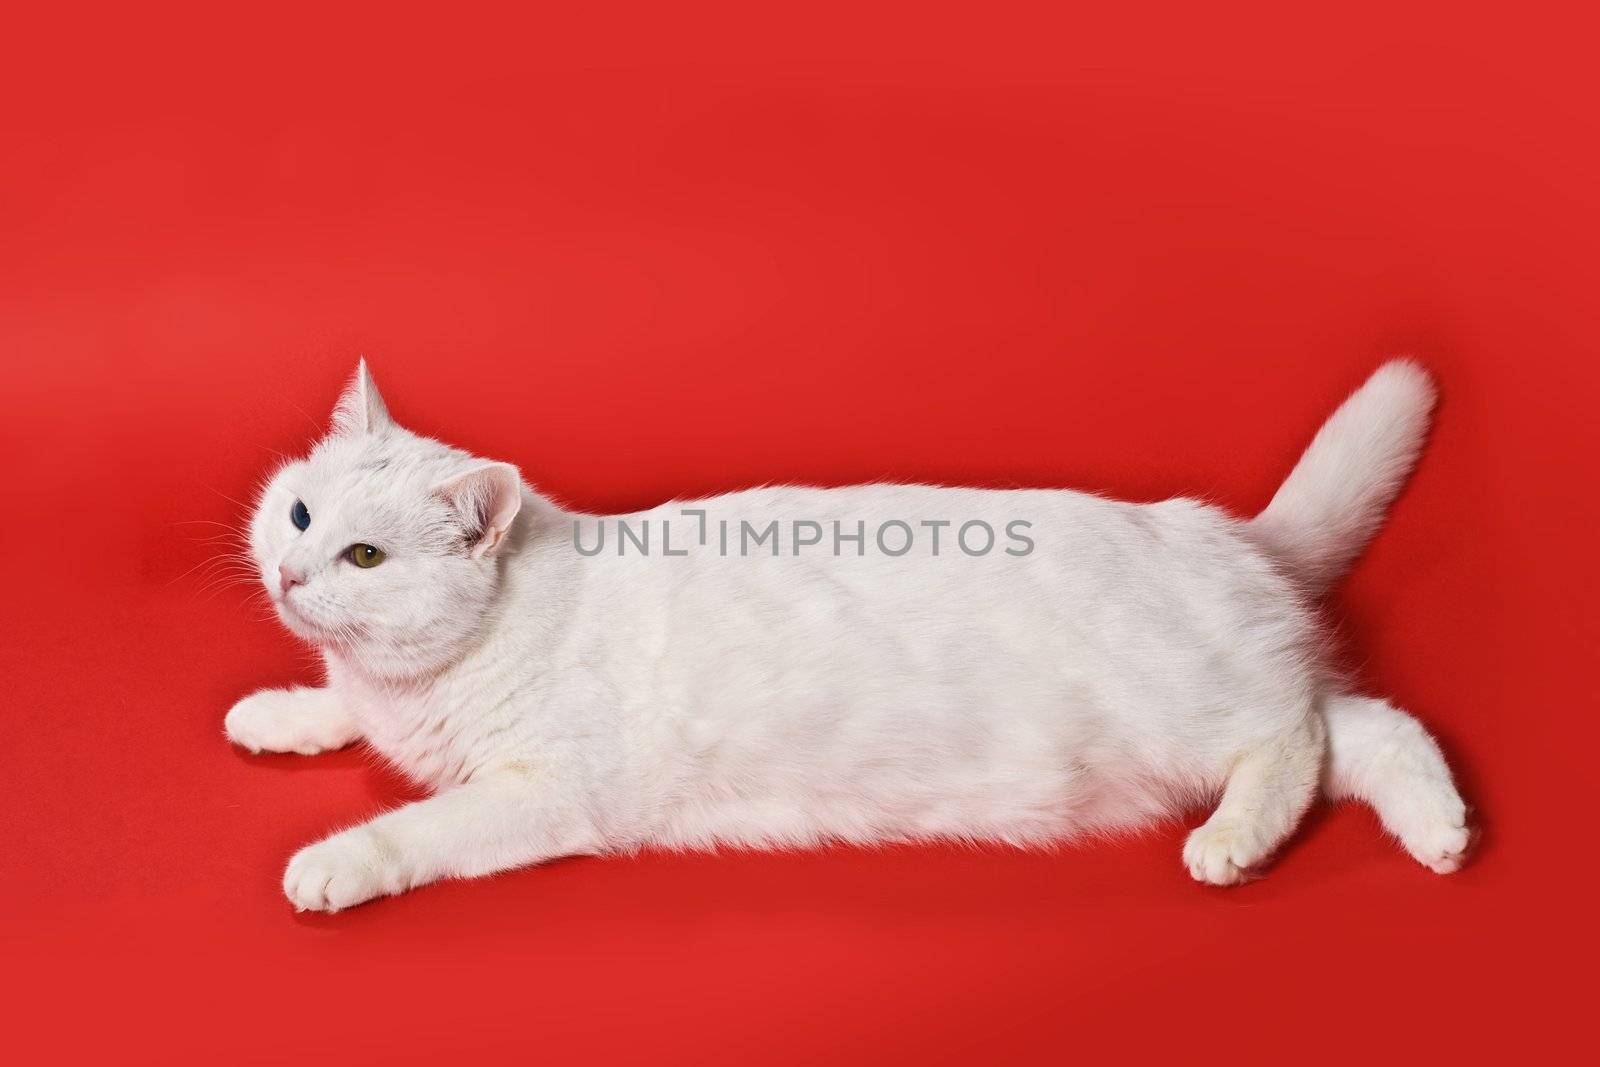 funnny white cat on the red background